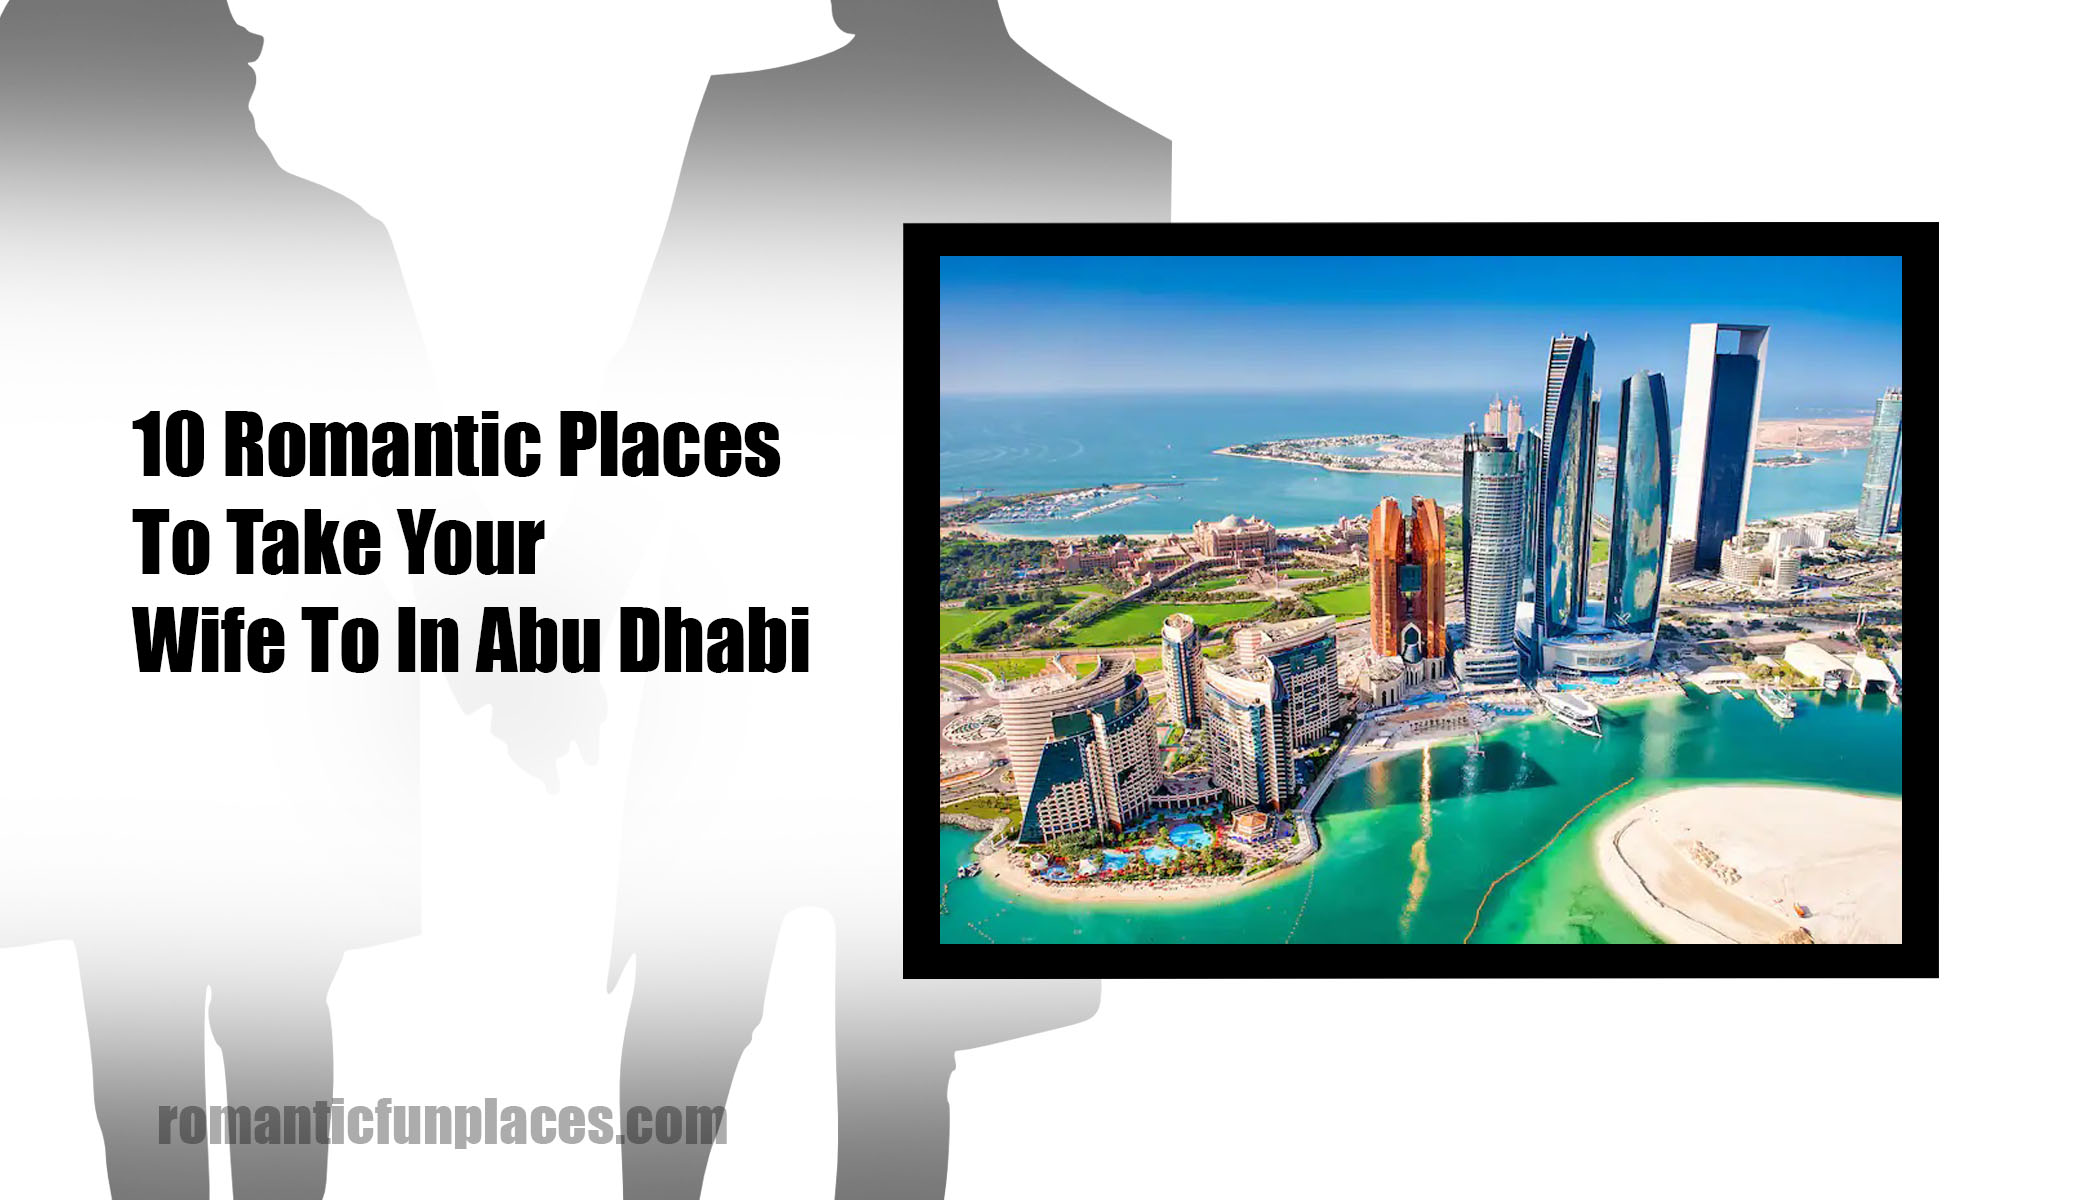 10 Romantic Places To Take Your Wife To In Abu Dhabi